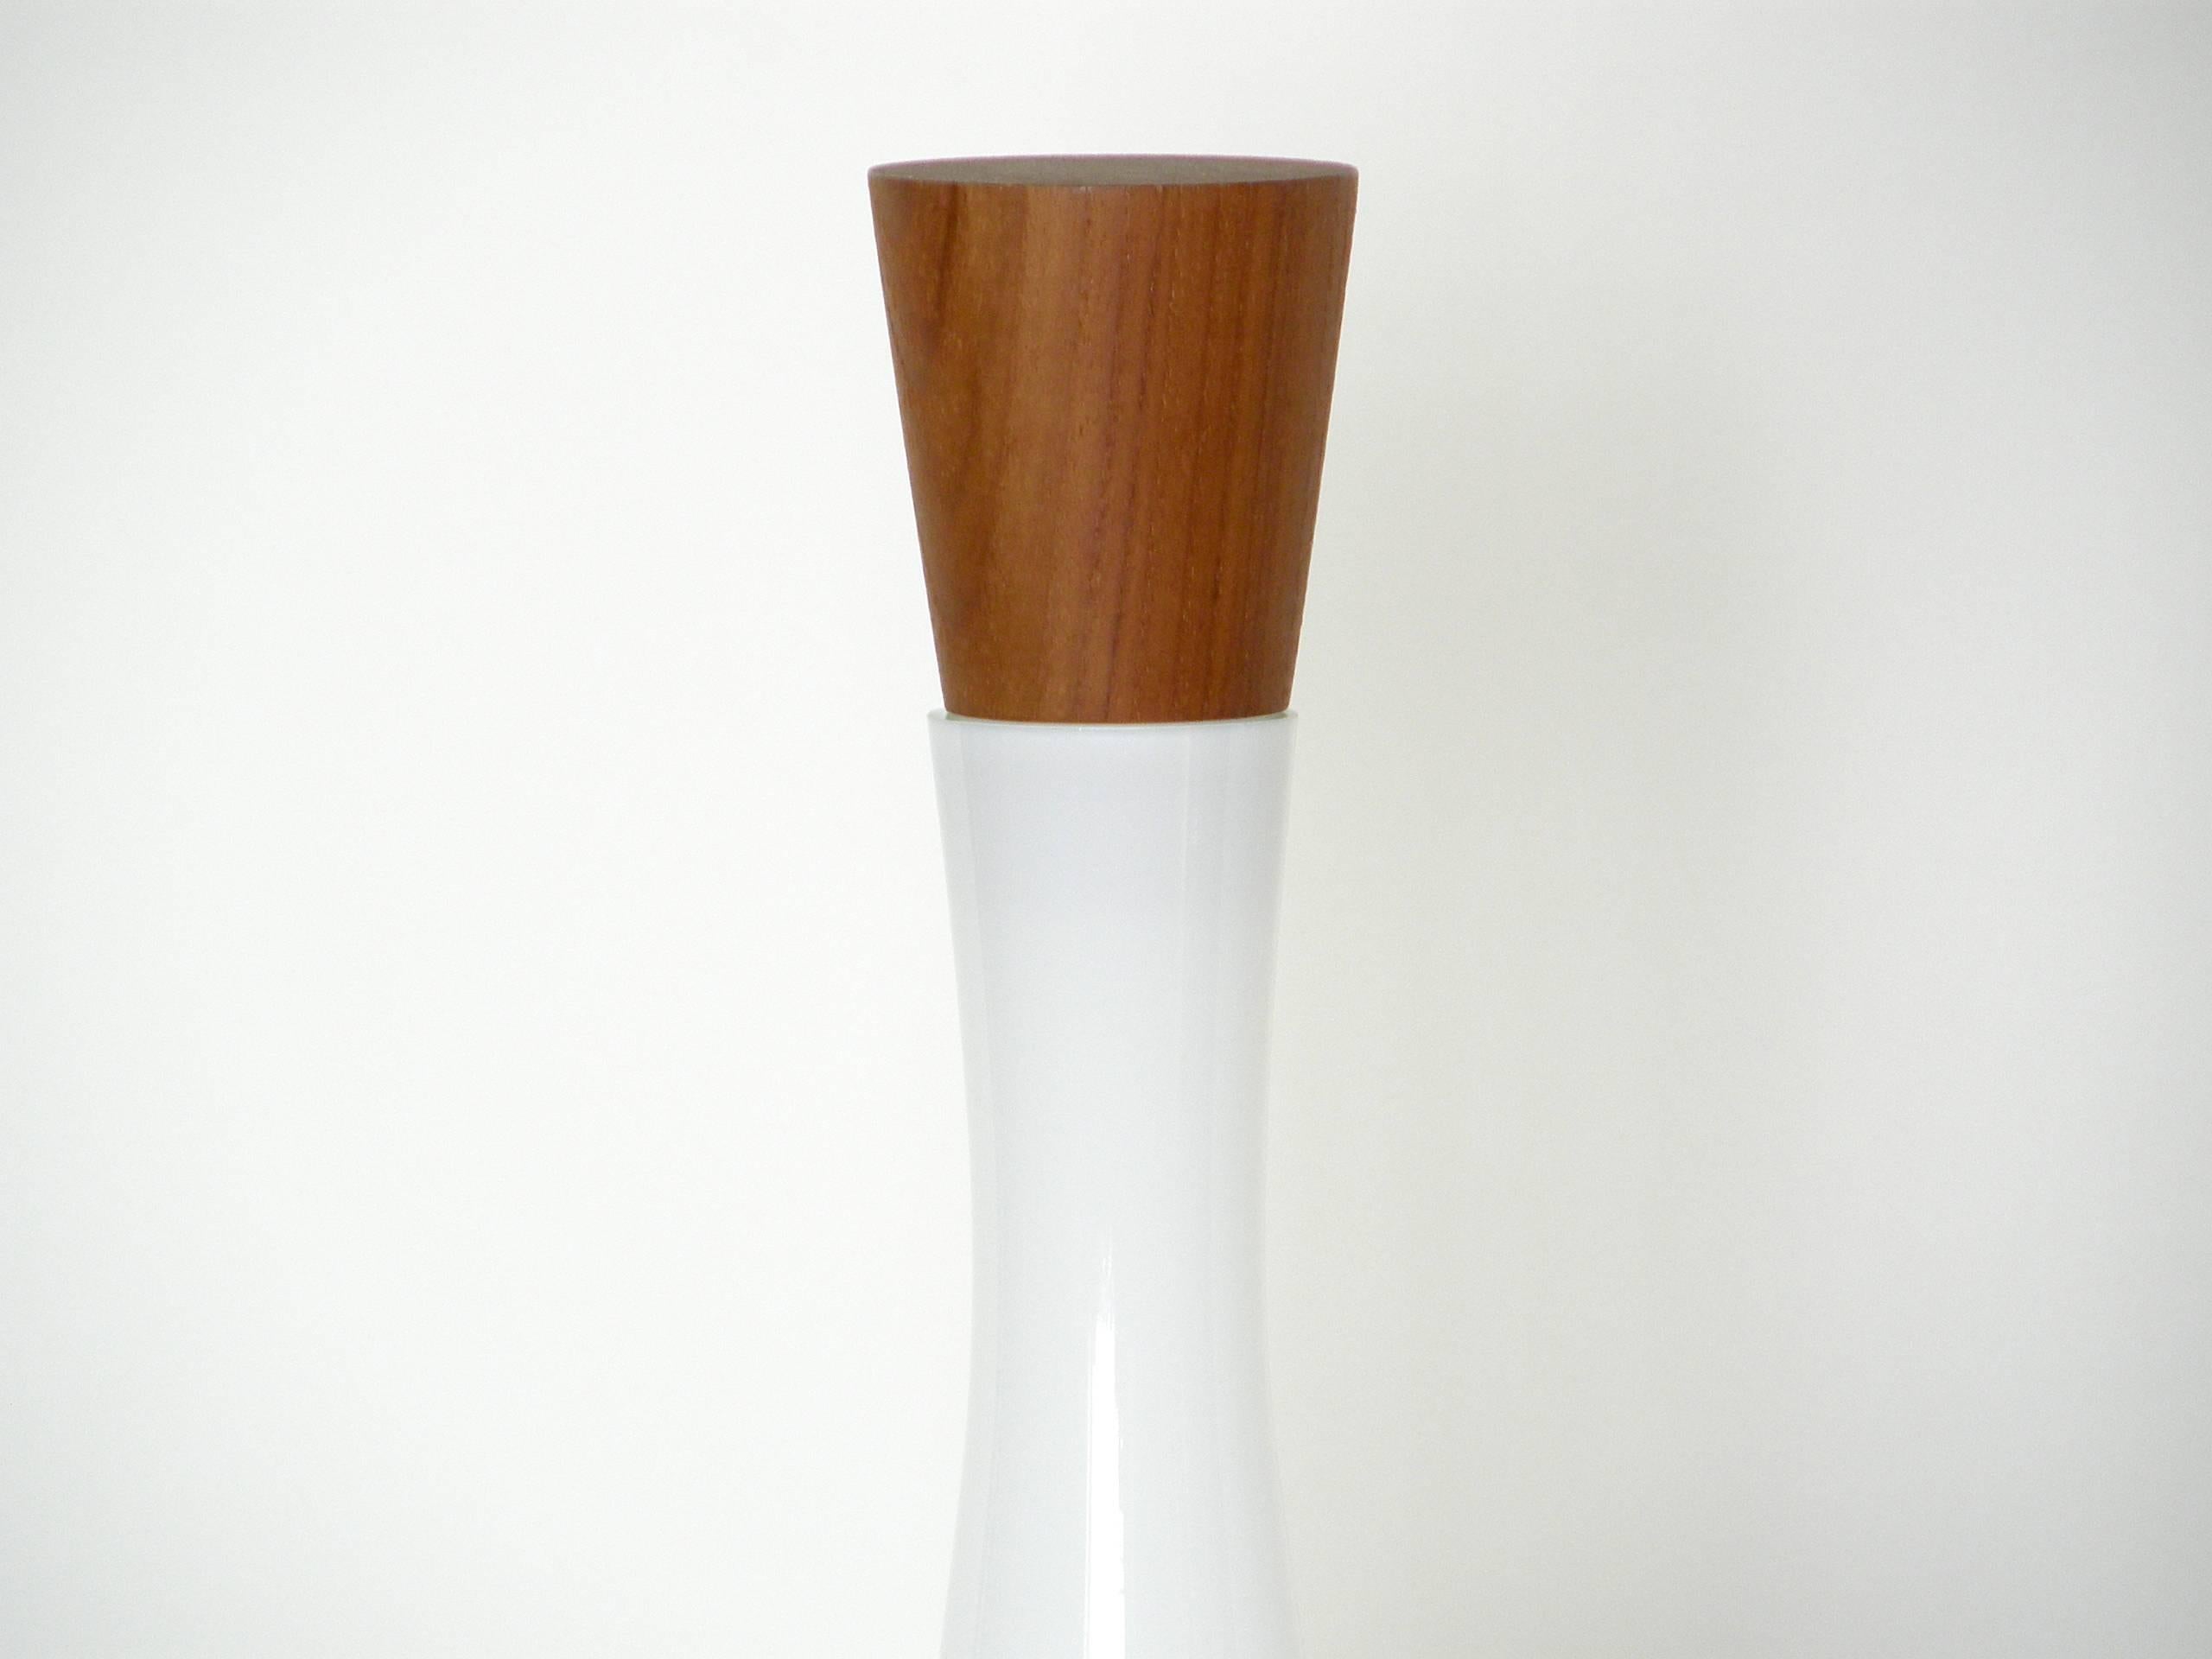 This elegant decanter in white cased glass with teak stopper was designed by Jacob Bang. It retains its original paper labels for Kastrup, the maker, and Raymor, the distributor.

Please contact us if you have any questions.